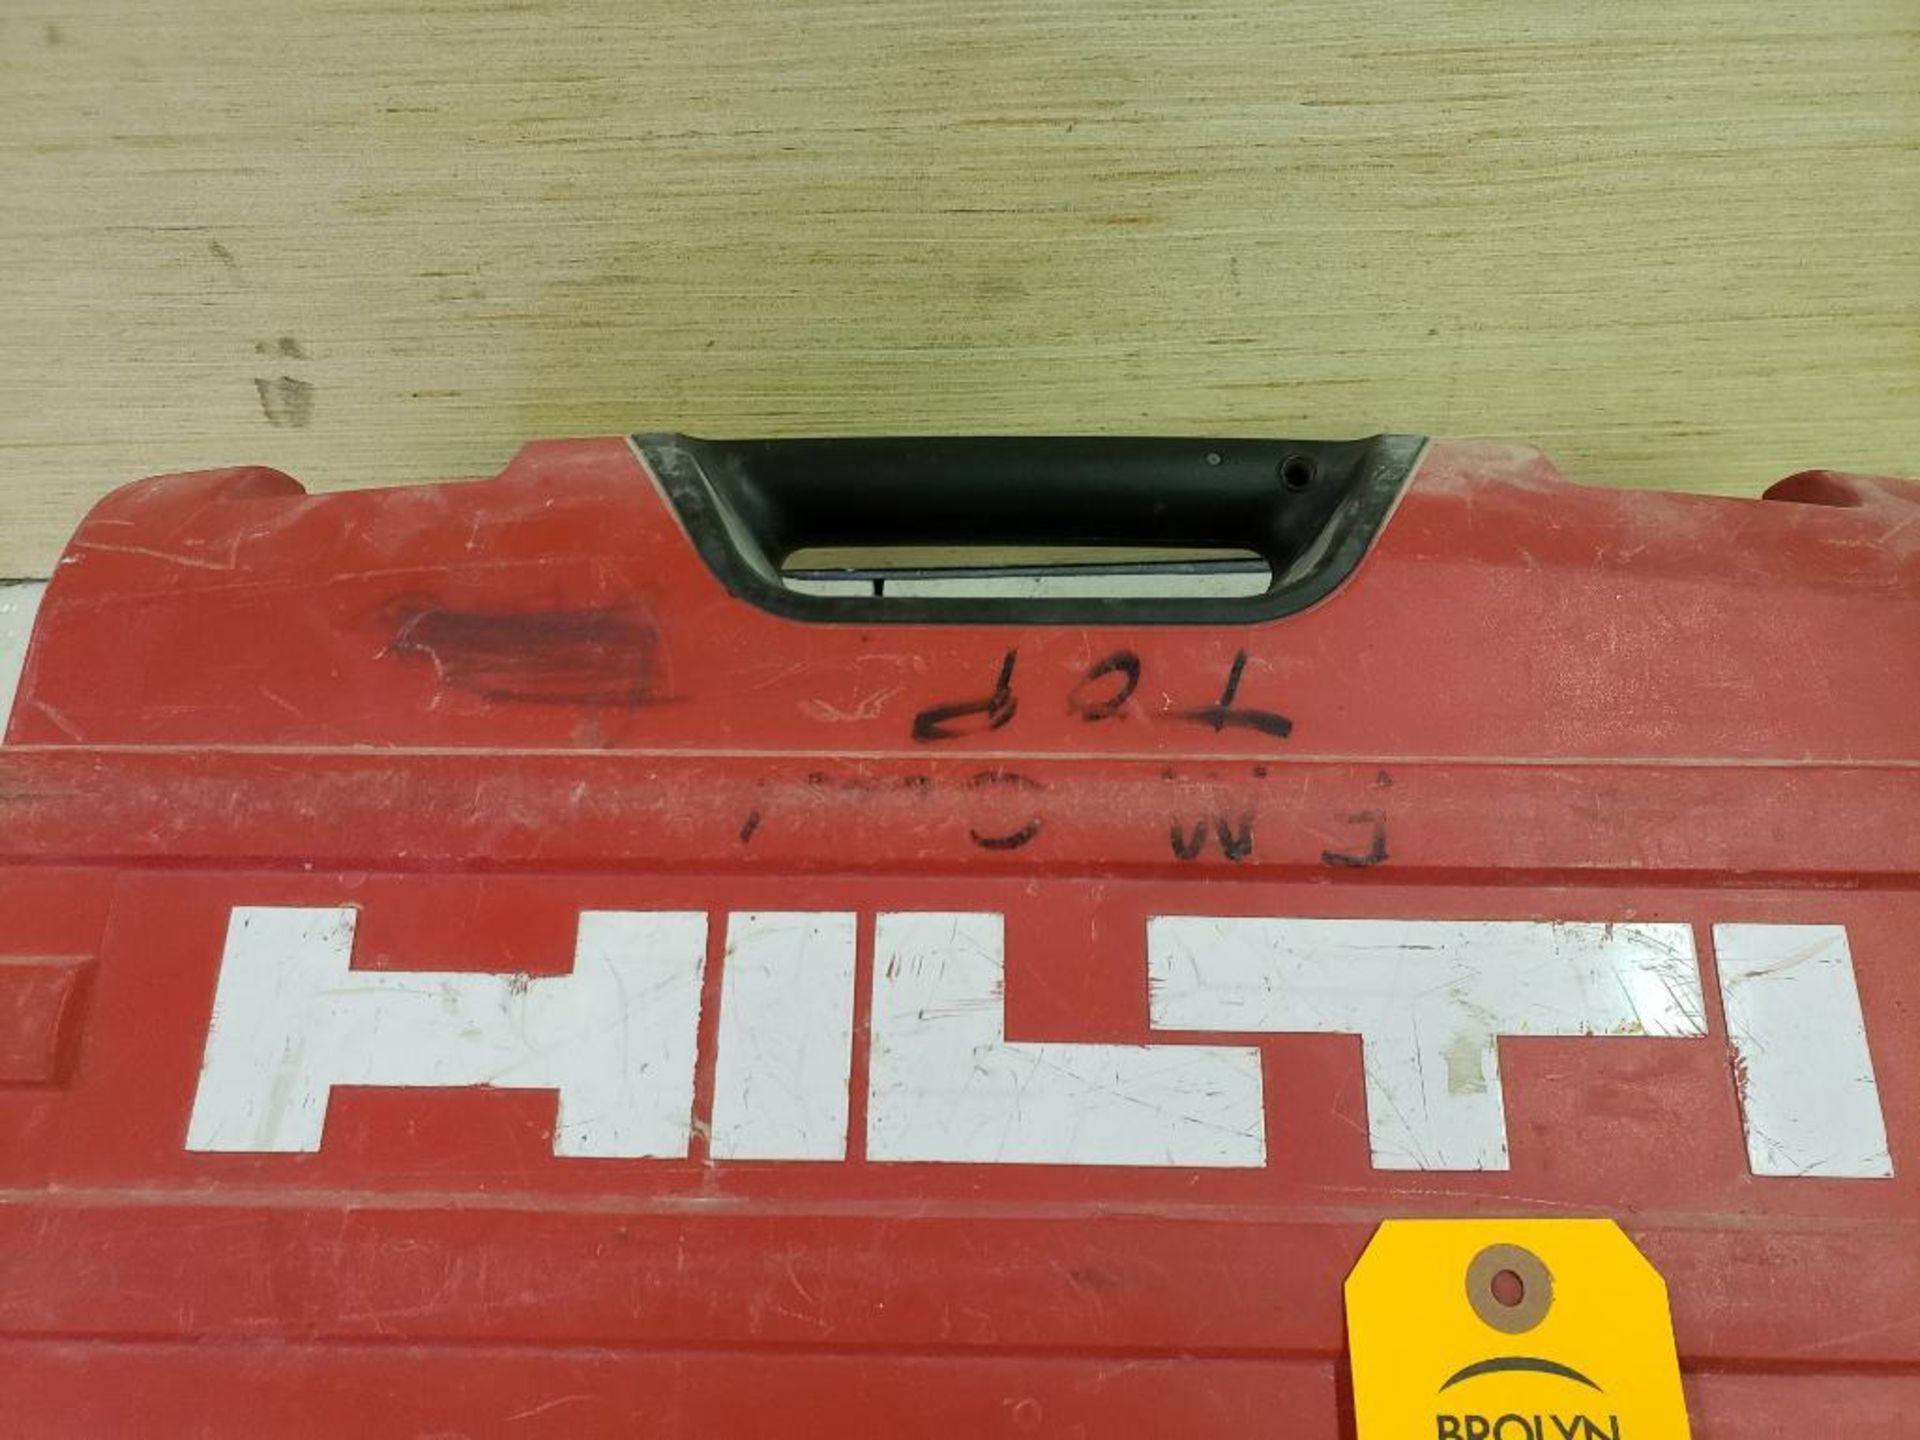 Hilti DX460 powder actuated fastening tool, with MX72 nail magazine. - Image 3 of 8